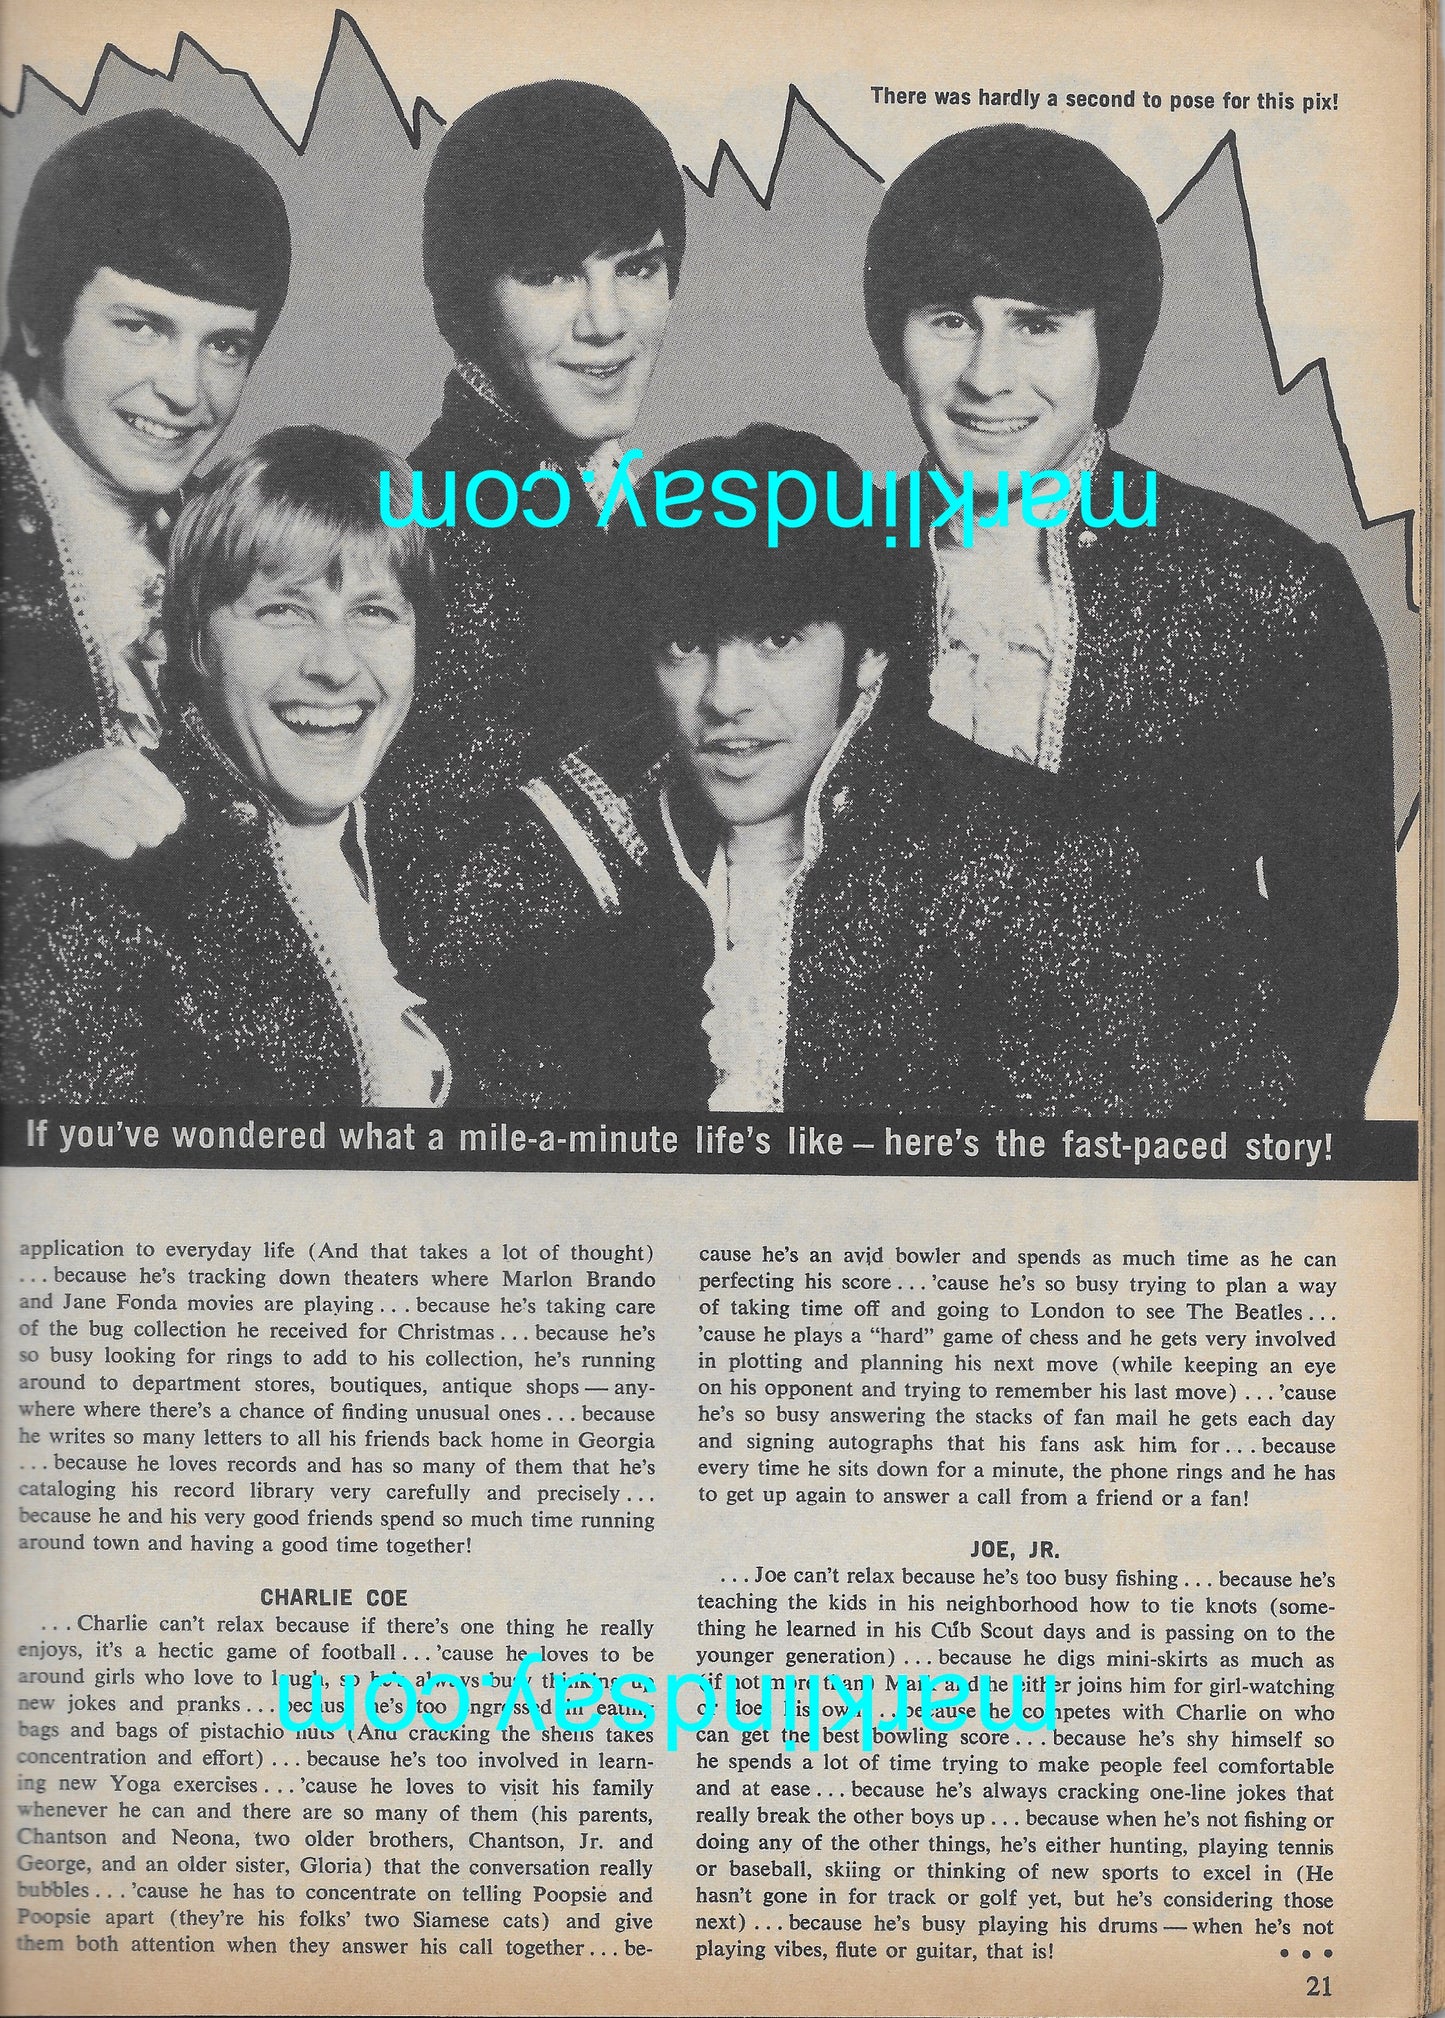 April 1968 Star Time Presents WILD WILD GROUPS Magazine - Personally Autographed to YOU by Mark